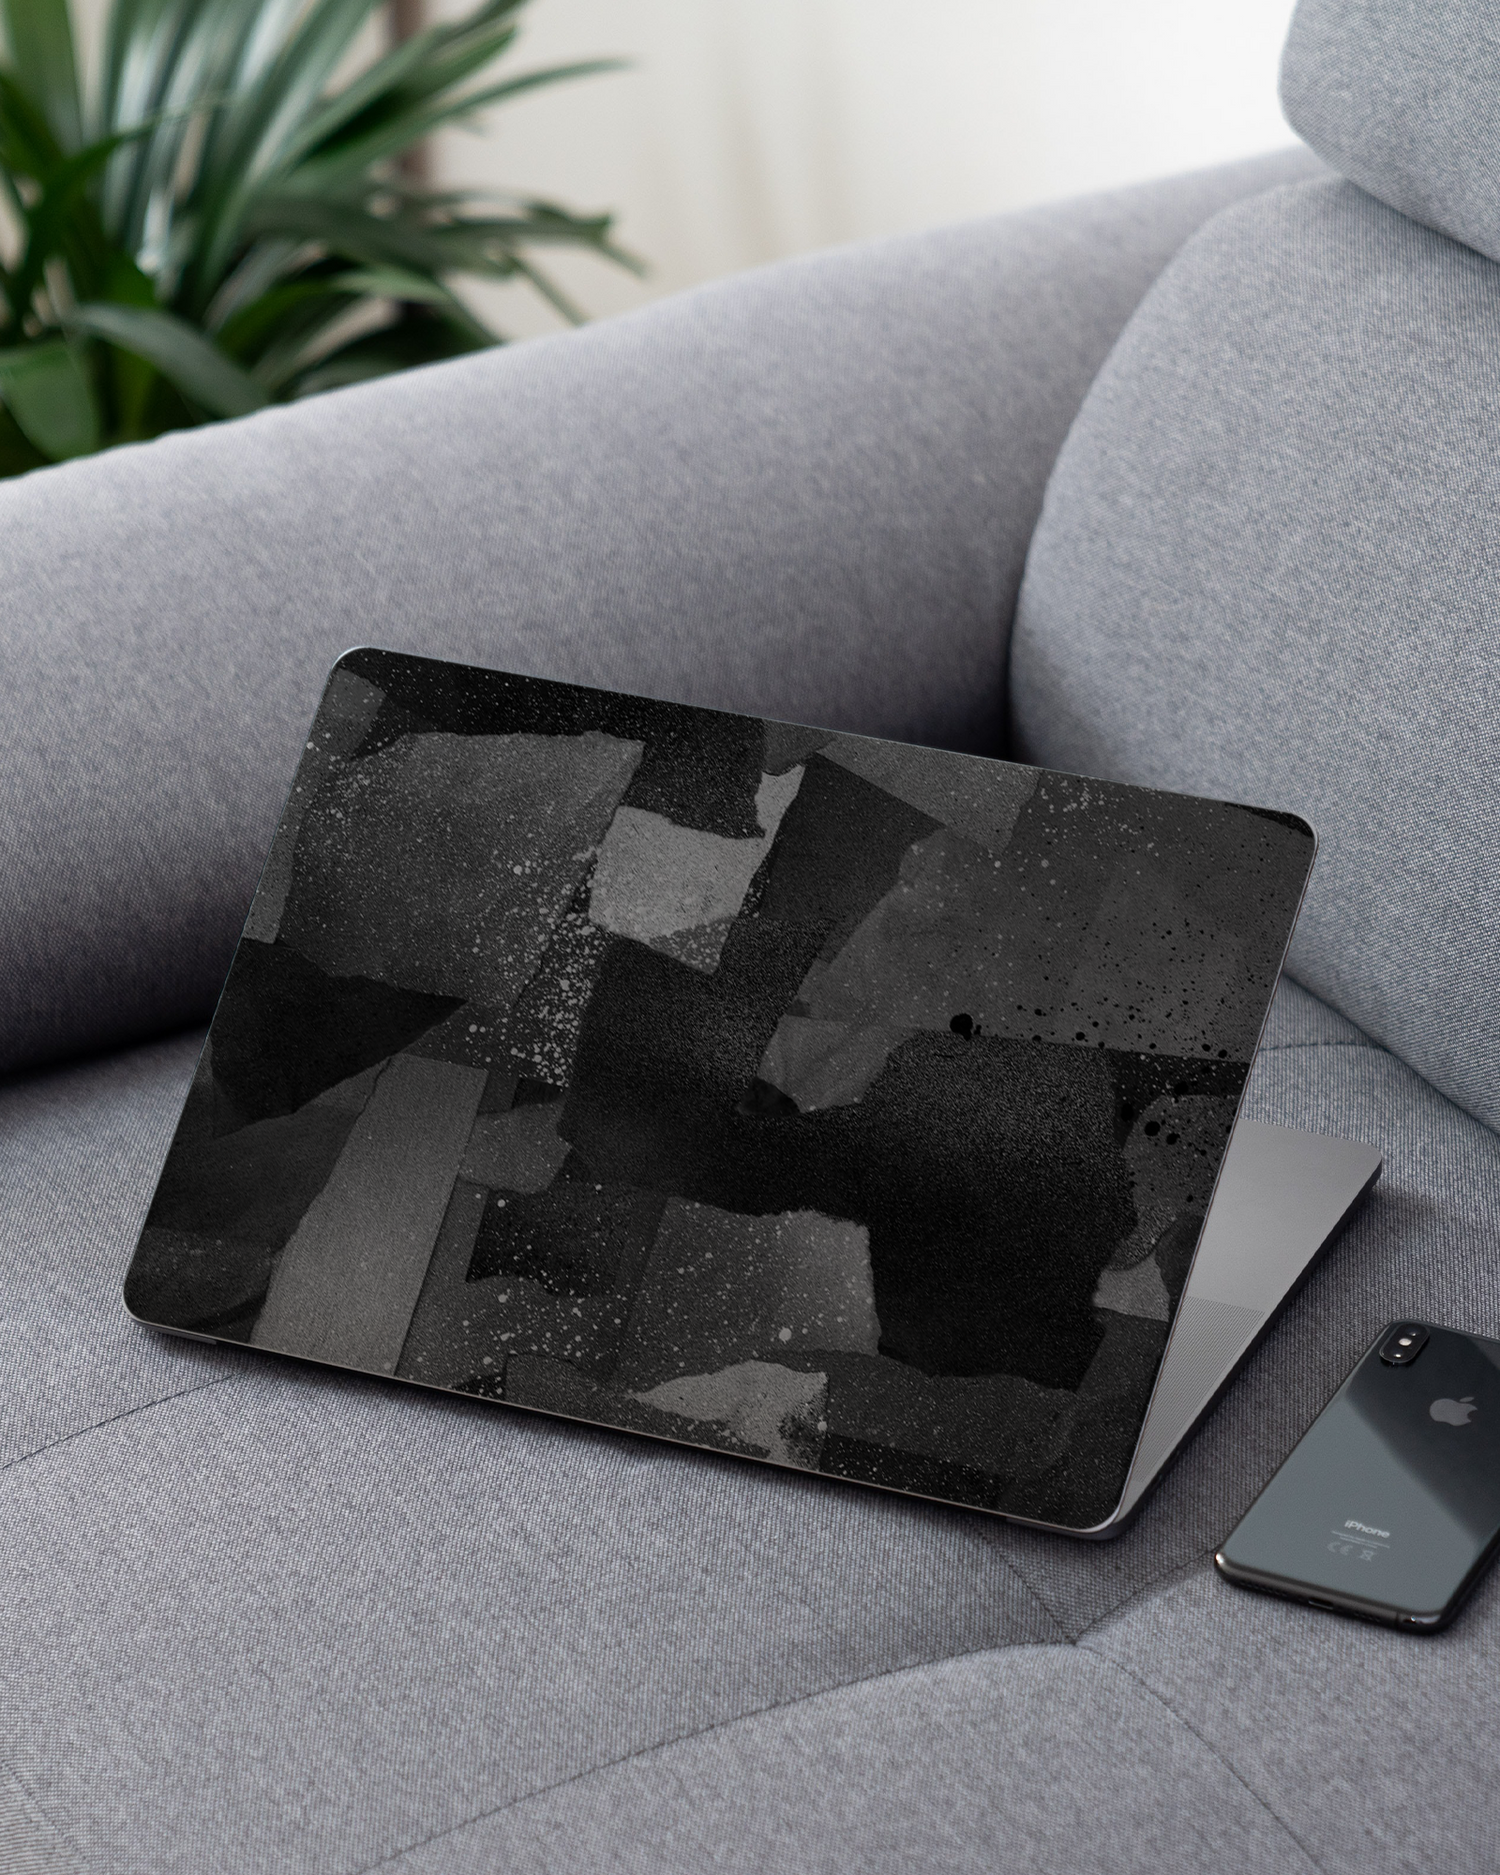 Torn Paper Collage Laptop Skin for 13 inch Apple MacBooks on a couch